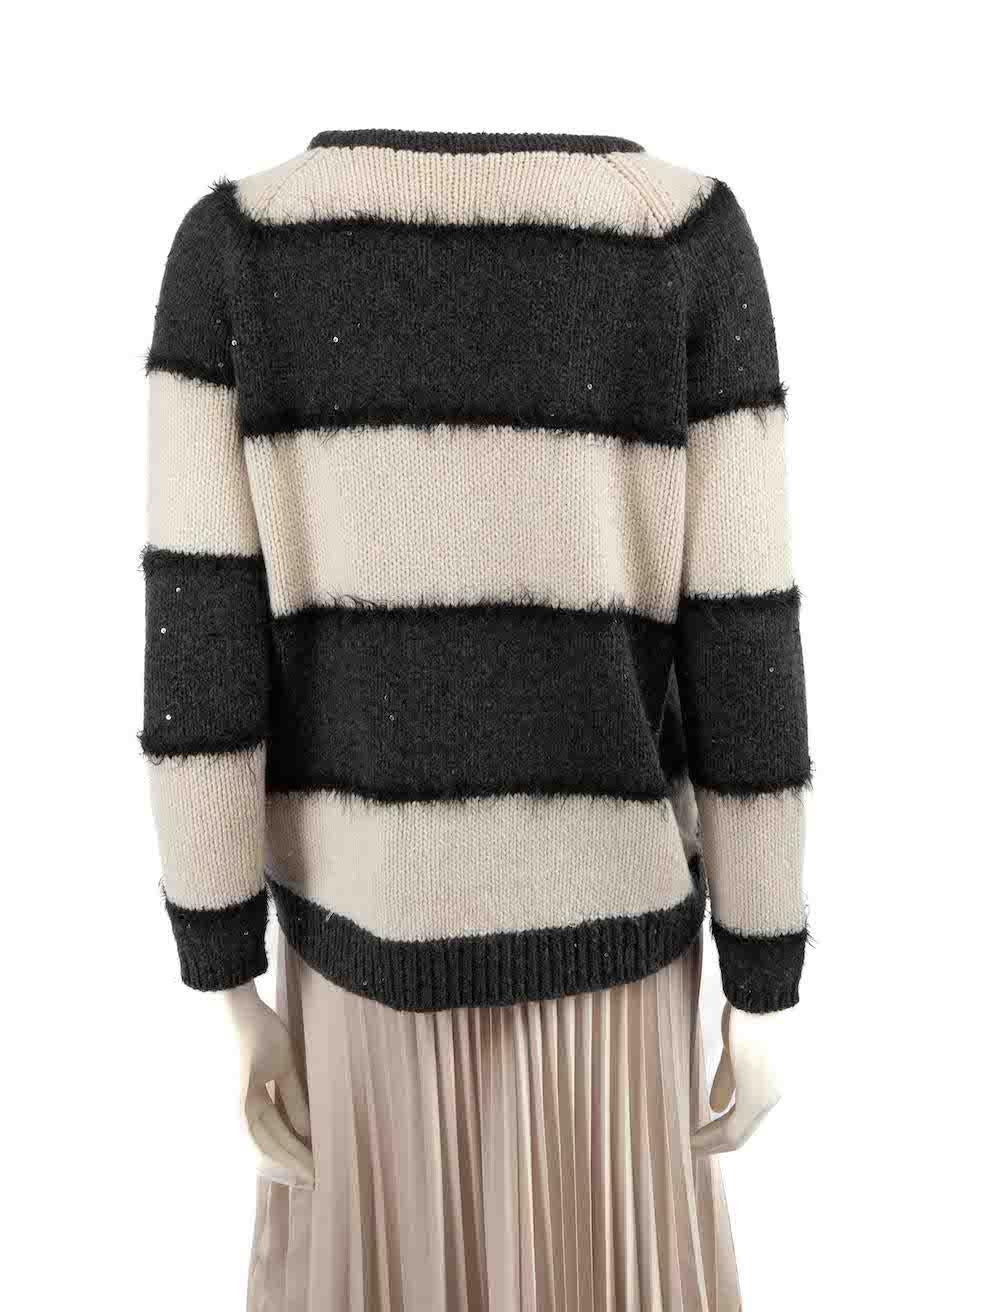 Brunello Cucinelli Striped Sequin Accent Jumper Size XS In Good Condition For Sale In London, GB